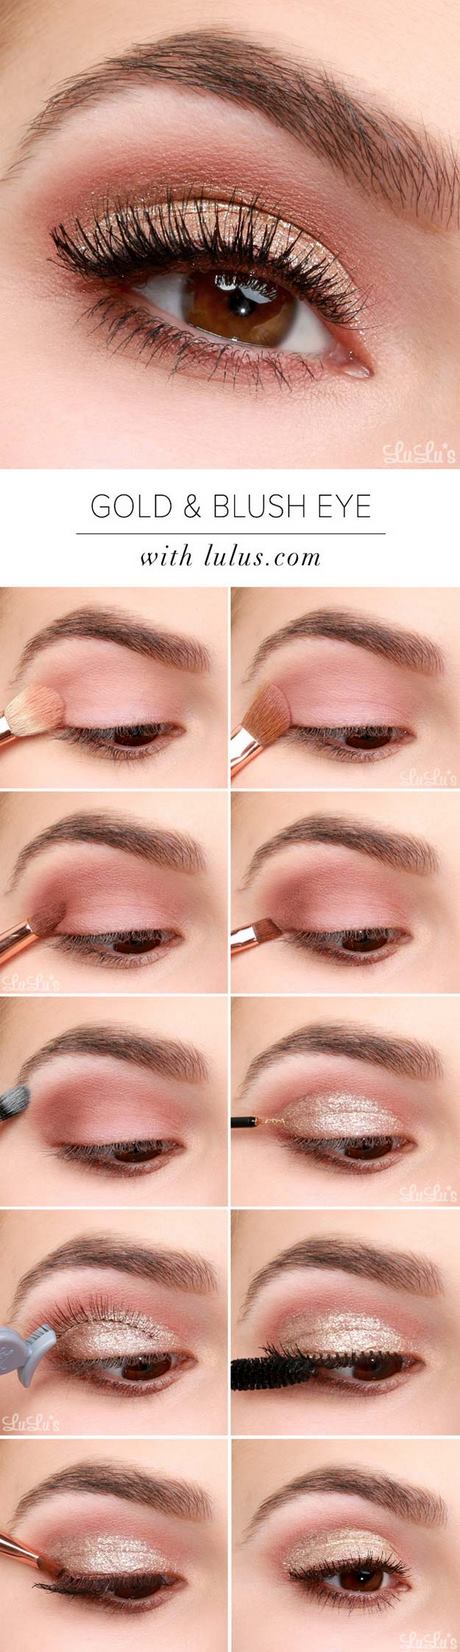 how-to-makeup-tips-36_4 Hoe make-up tips